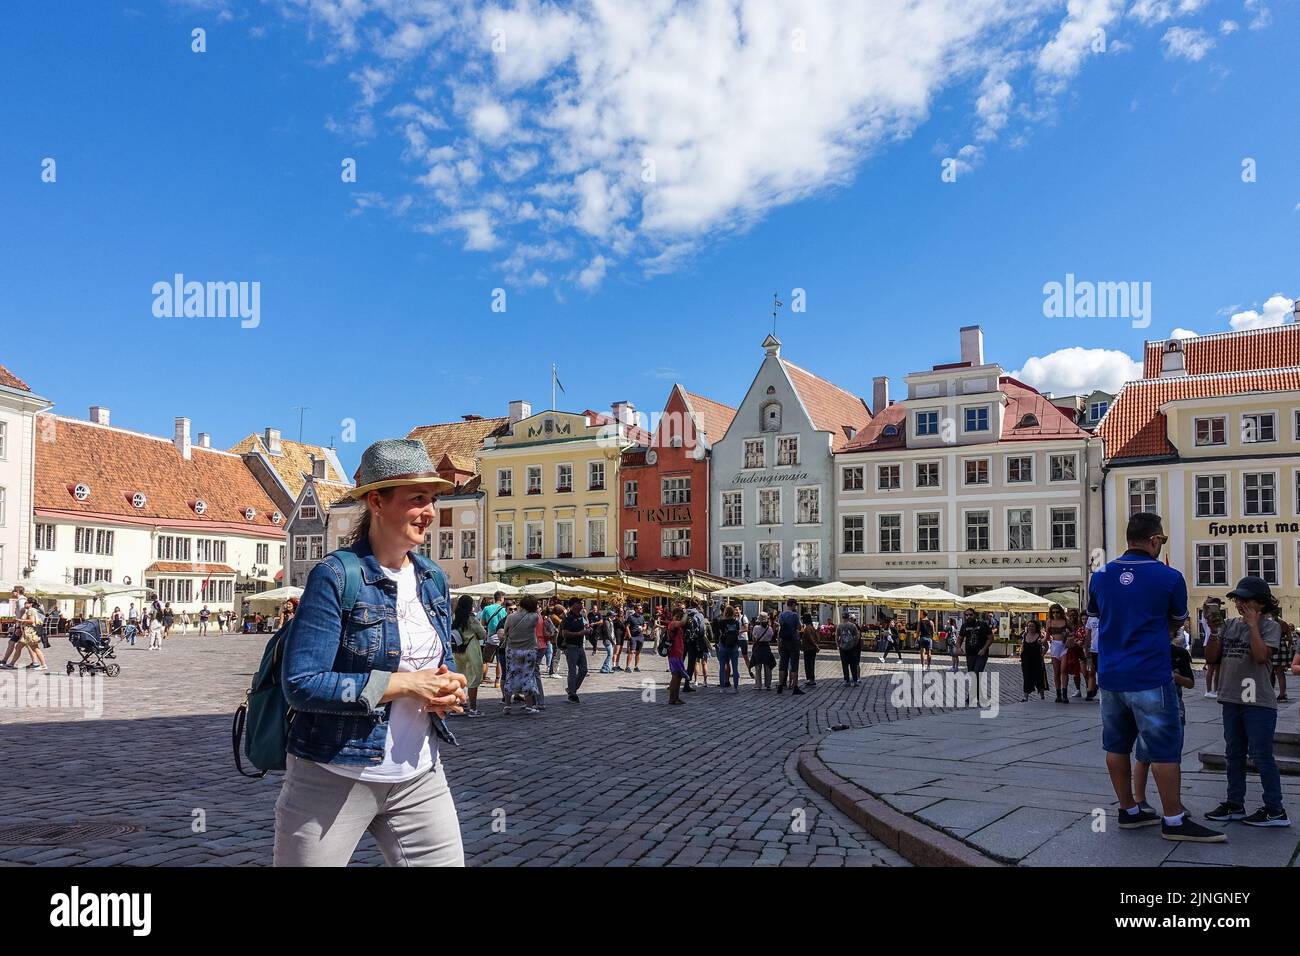 Tallinn, Estonia 31 July 2022  General view of the old town squre with open air restaurants and not so many touritst visiting the city is seen in Tallinn, Estonia on 31 July 2022  Credit: Vadim Pacajev/Alamy Live News Stock Photo